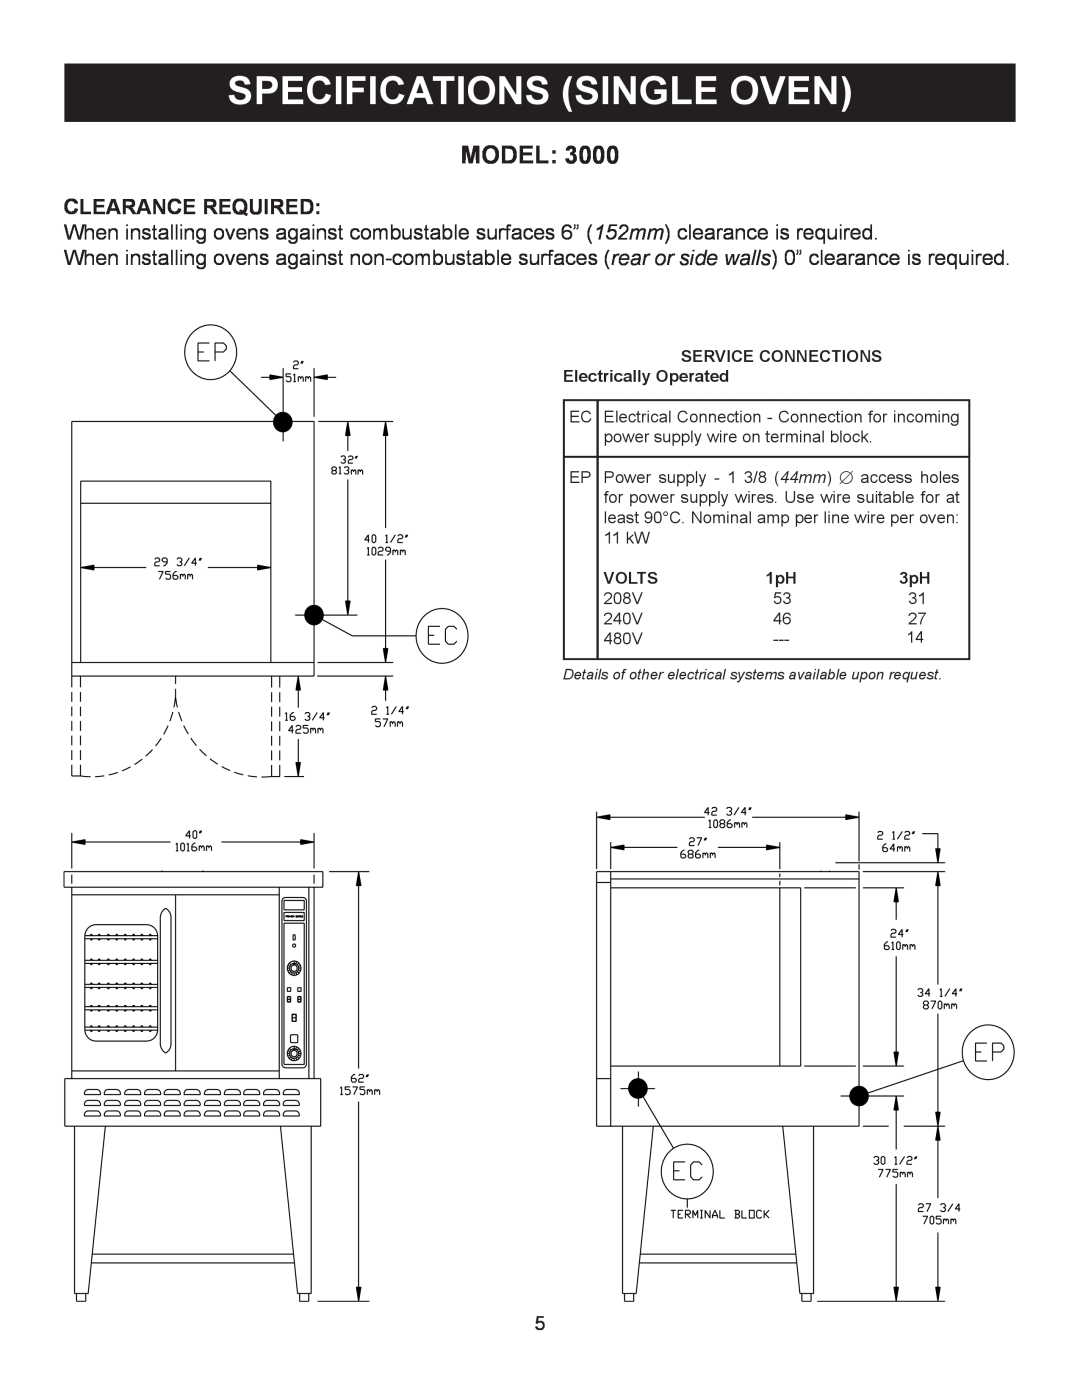 Market Forge Industries M 3092, M 3000 owner manual Specifications Single Oven, Model, Clearance Required 